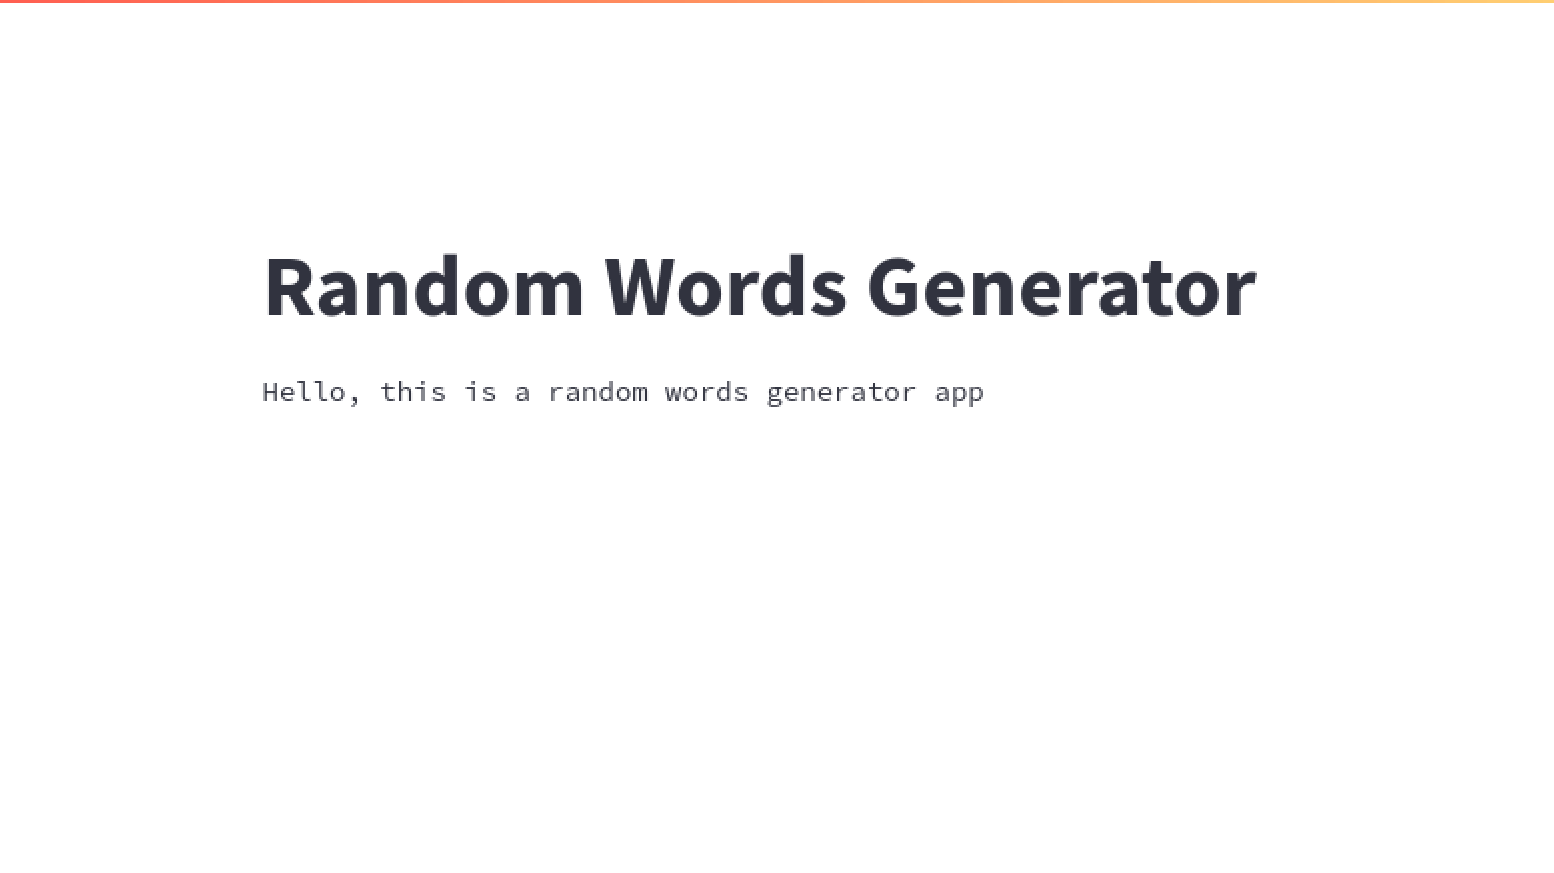 the app should show the title (Random Words Generator) and text (Hello, this is a random words generator app)